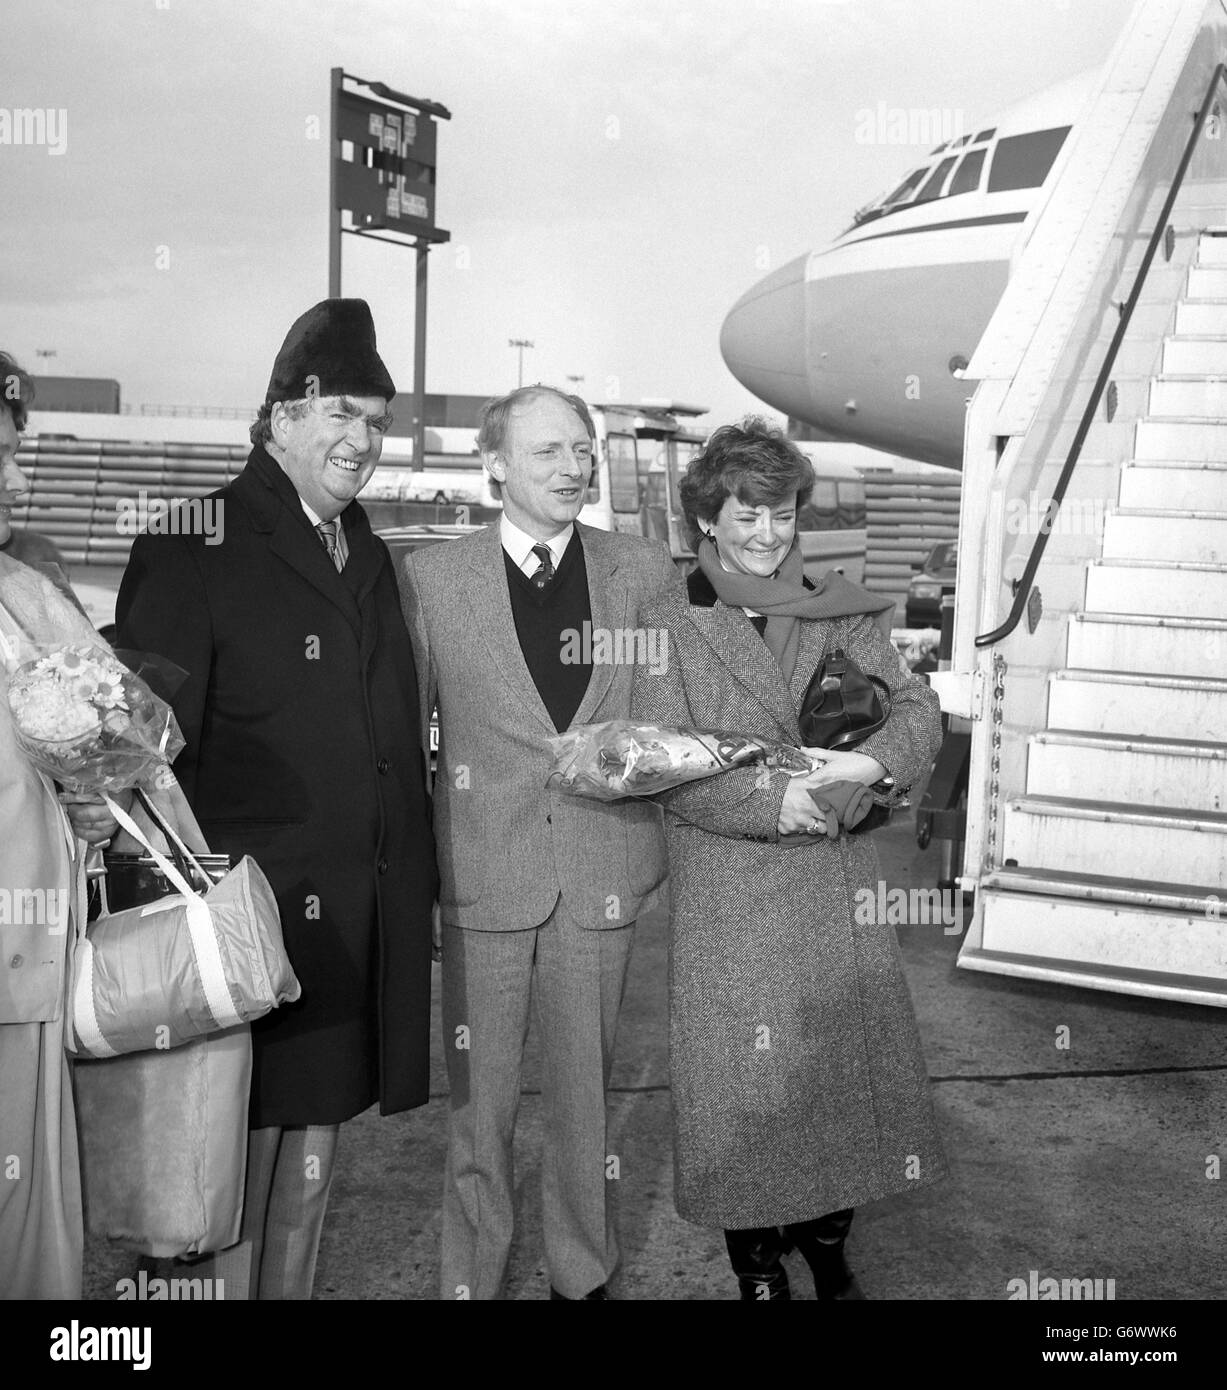 Labour leader Neil Kinnock (centre), with his wife Glenys and Shadow Foreign Secretary Denis Healey, at London Heathrow Airport before flying to the Soviet Union. Stock Photo